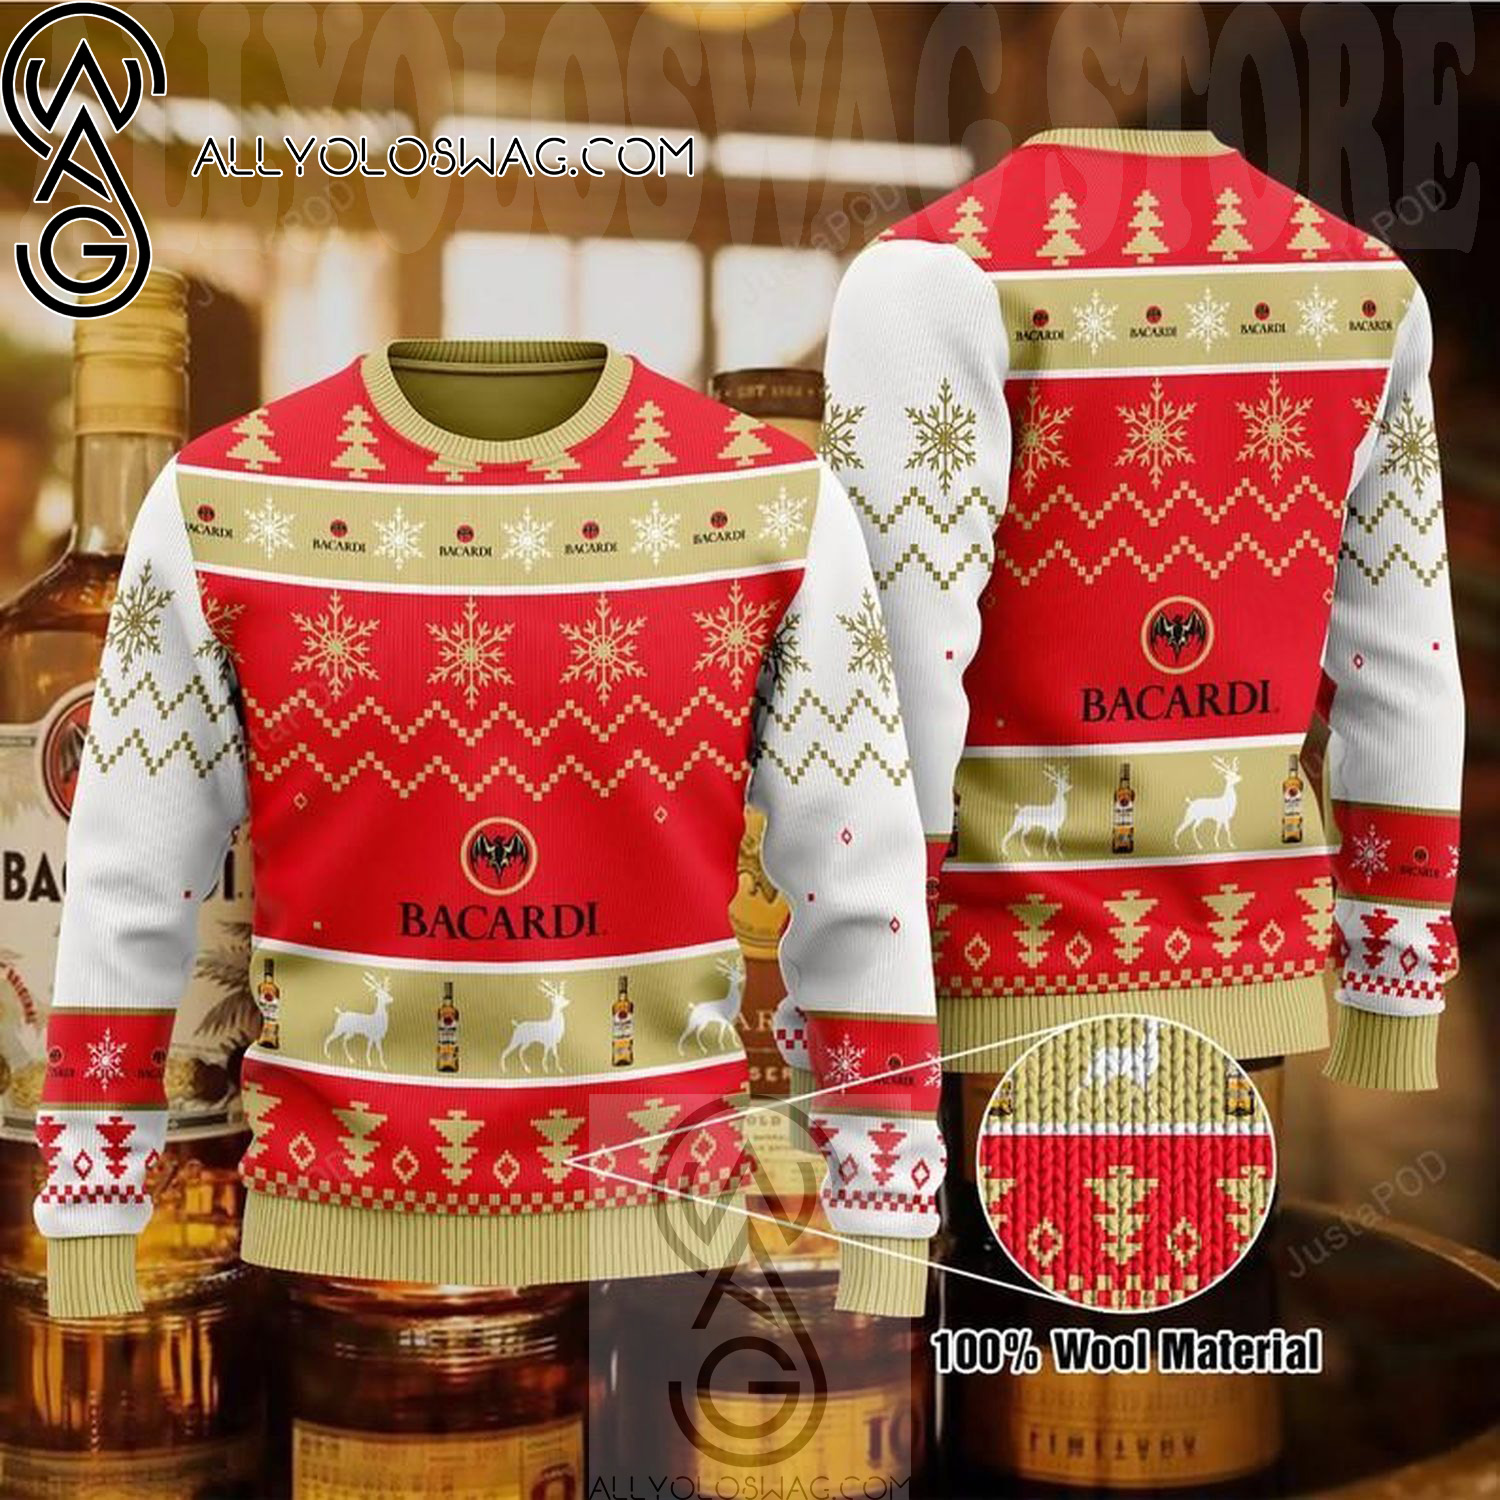 Bacardi White Rum Holiday Party Ugly Christmas Sweater